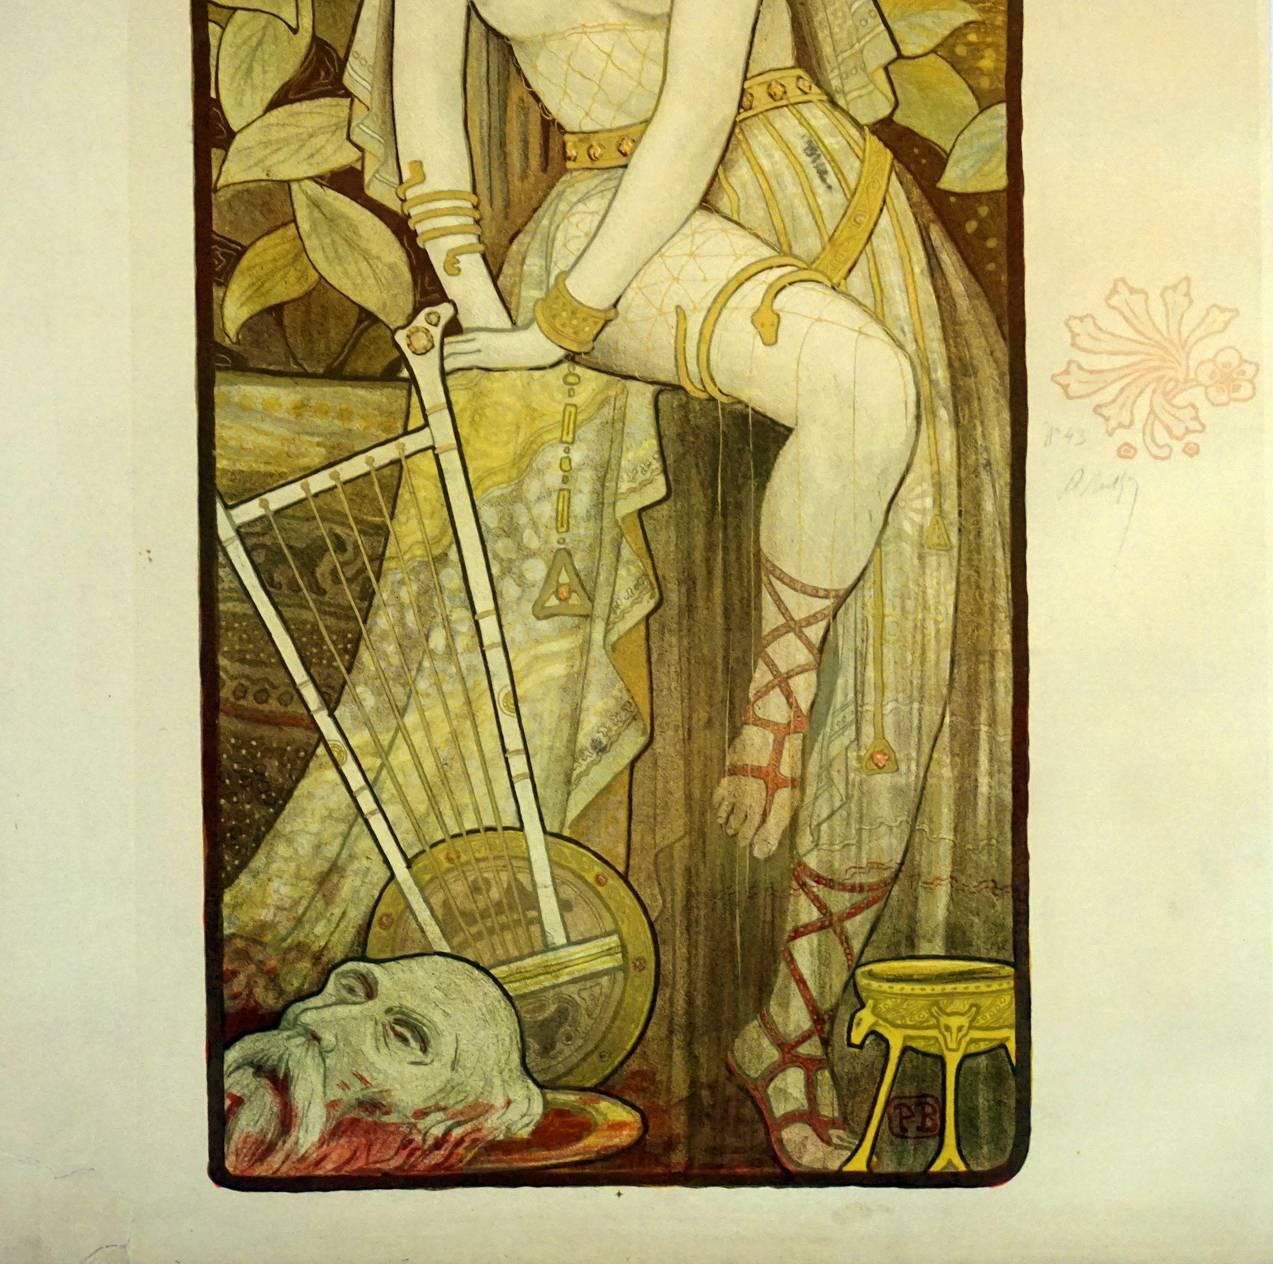 This is a very rare hand-signed Art Nouveau & Belle Époque Decorative Panel (limited edition) #43 by Paul Berthon in 1898. Pictured is a topless Salomé, with the head of John the Baptist in the bottom left corner. She’s sitting, wearing the